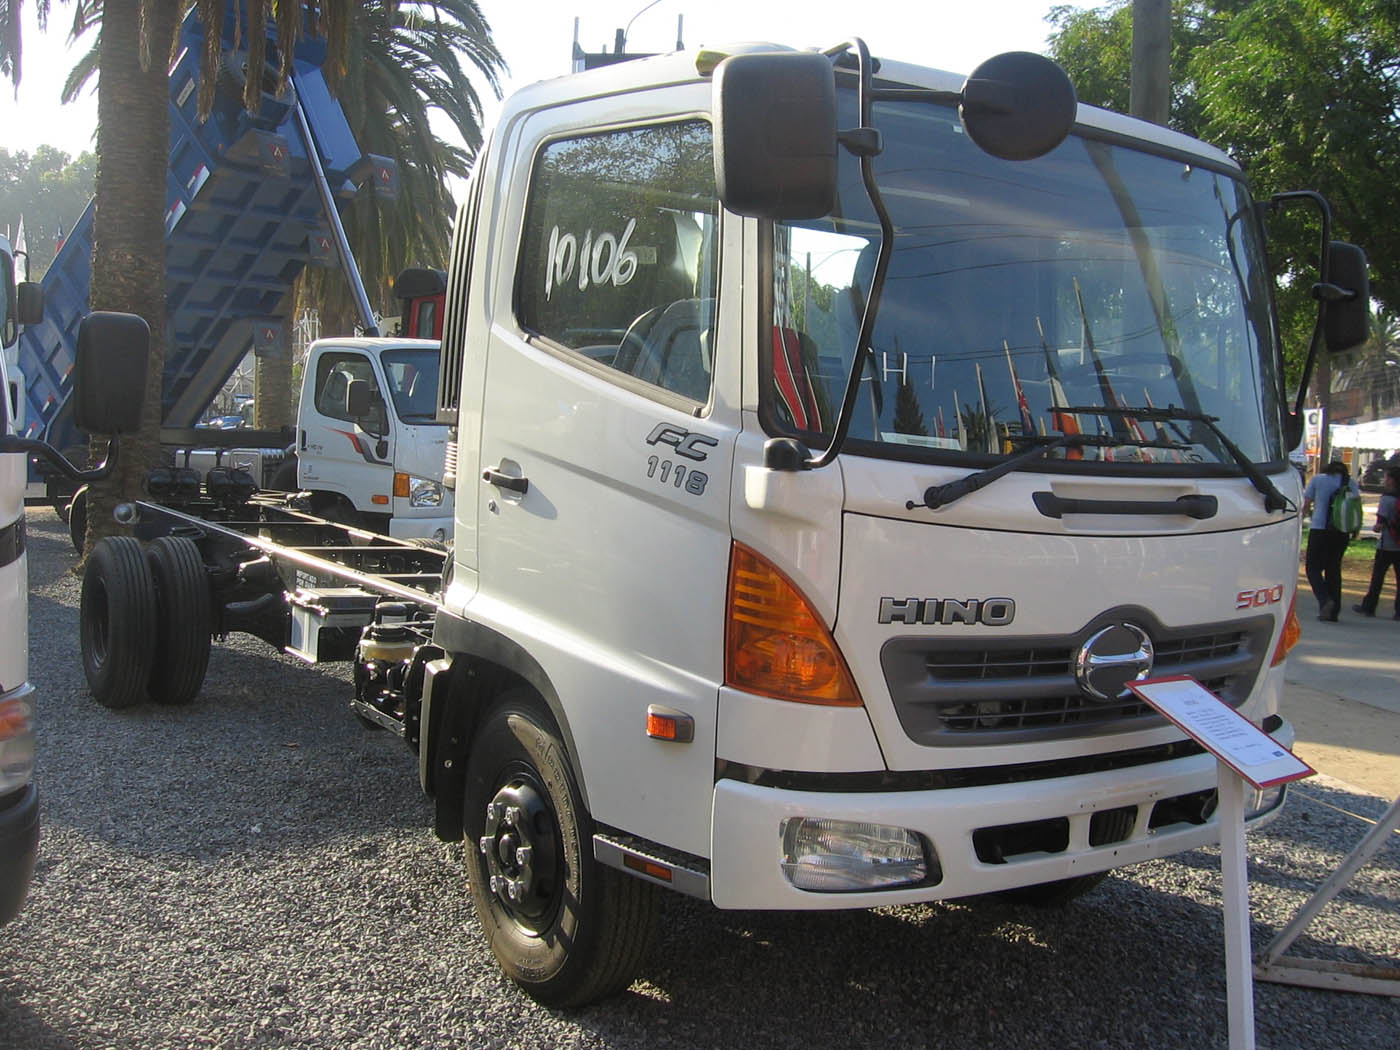 Hino 500 FC 1118 - cars catalog, specs, features, photos, videos, review,